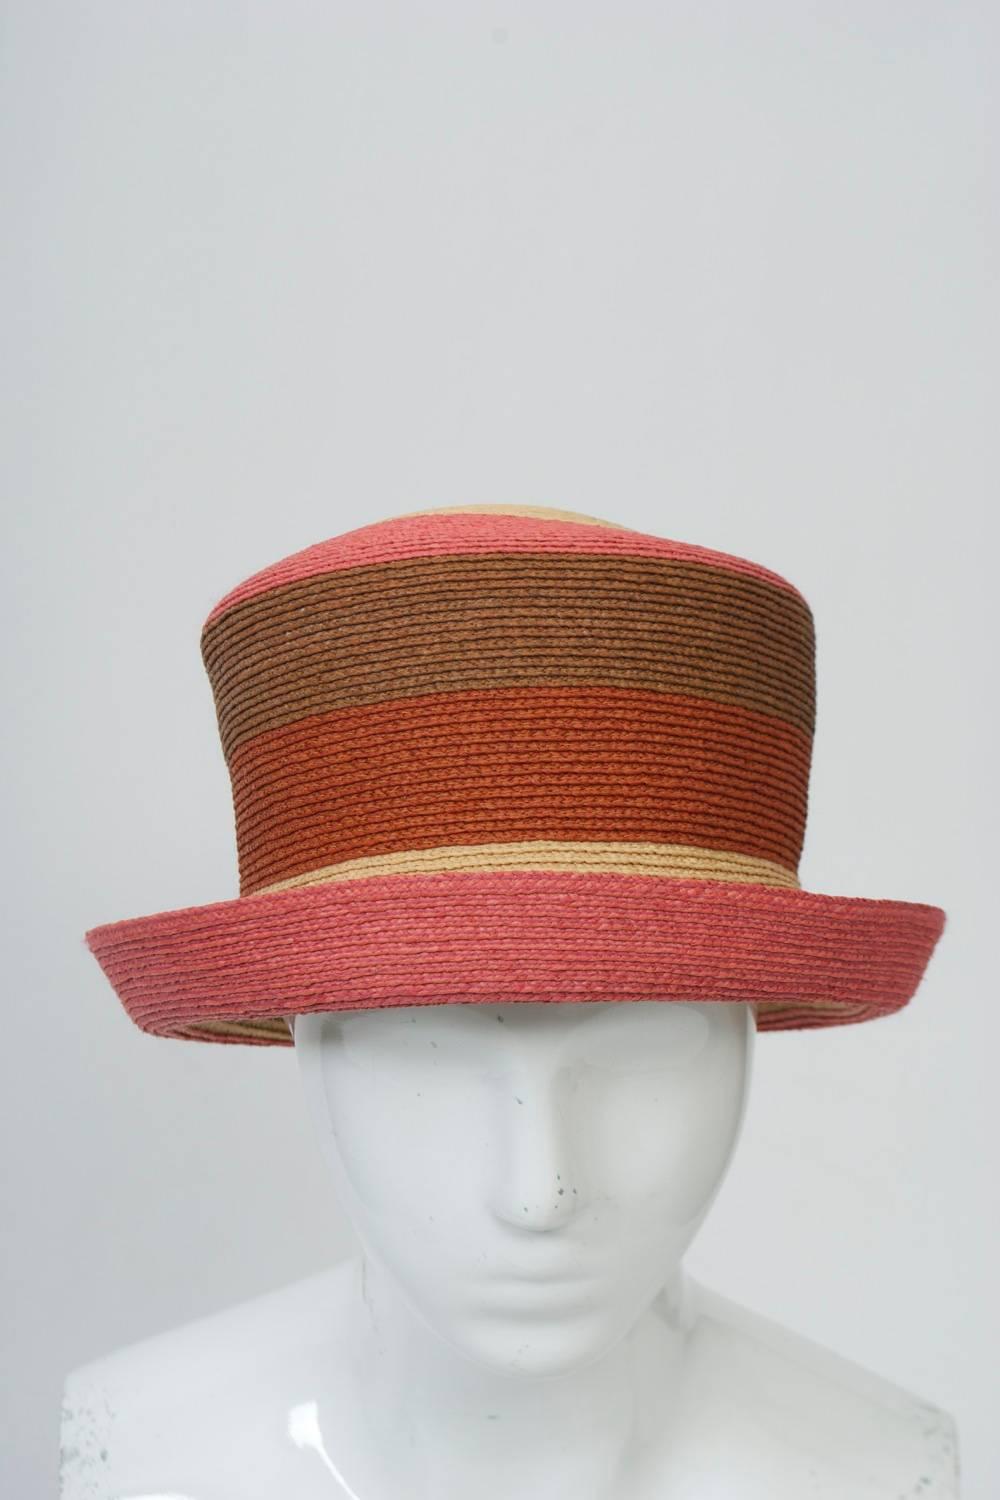 Australian designer Annabel Ingall hat in bands of natural, melon, rust, and brown straw. High crown with small, turned-up brim. Looks unused.